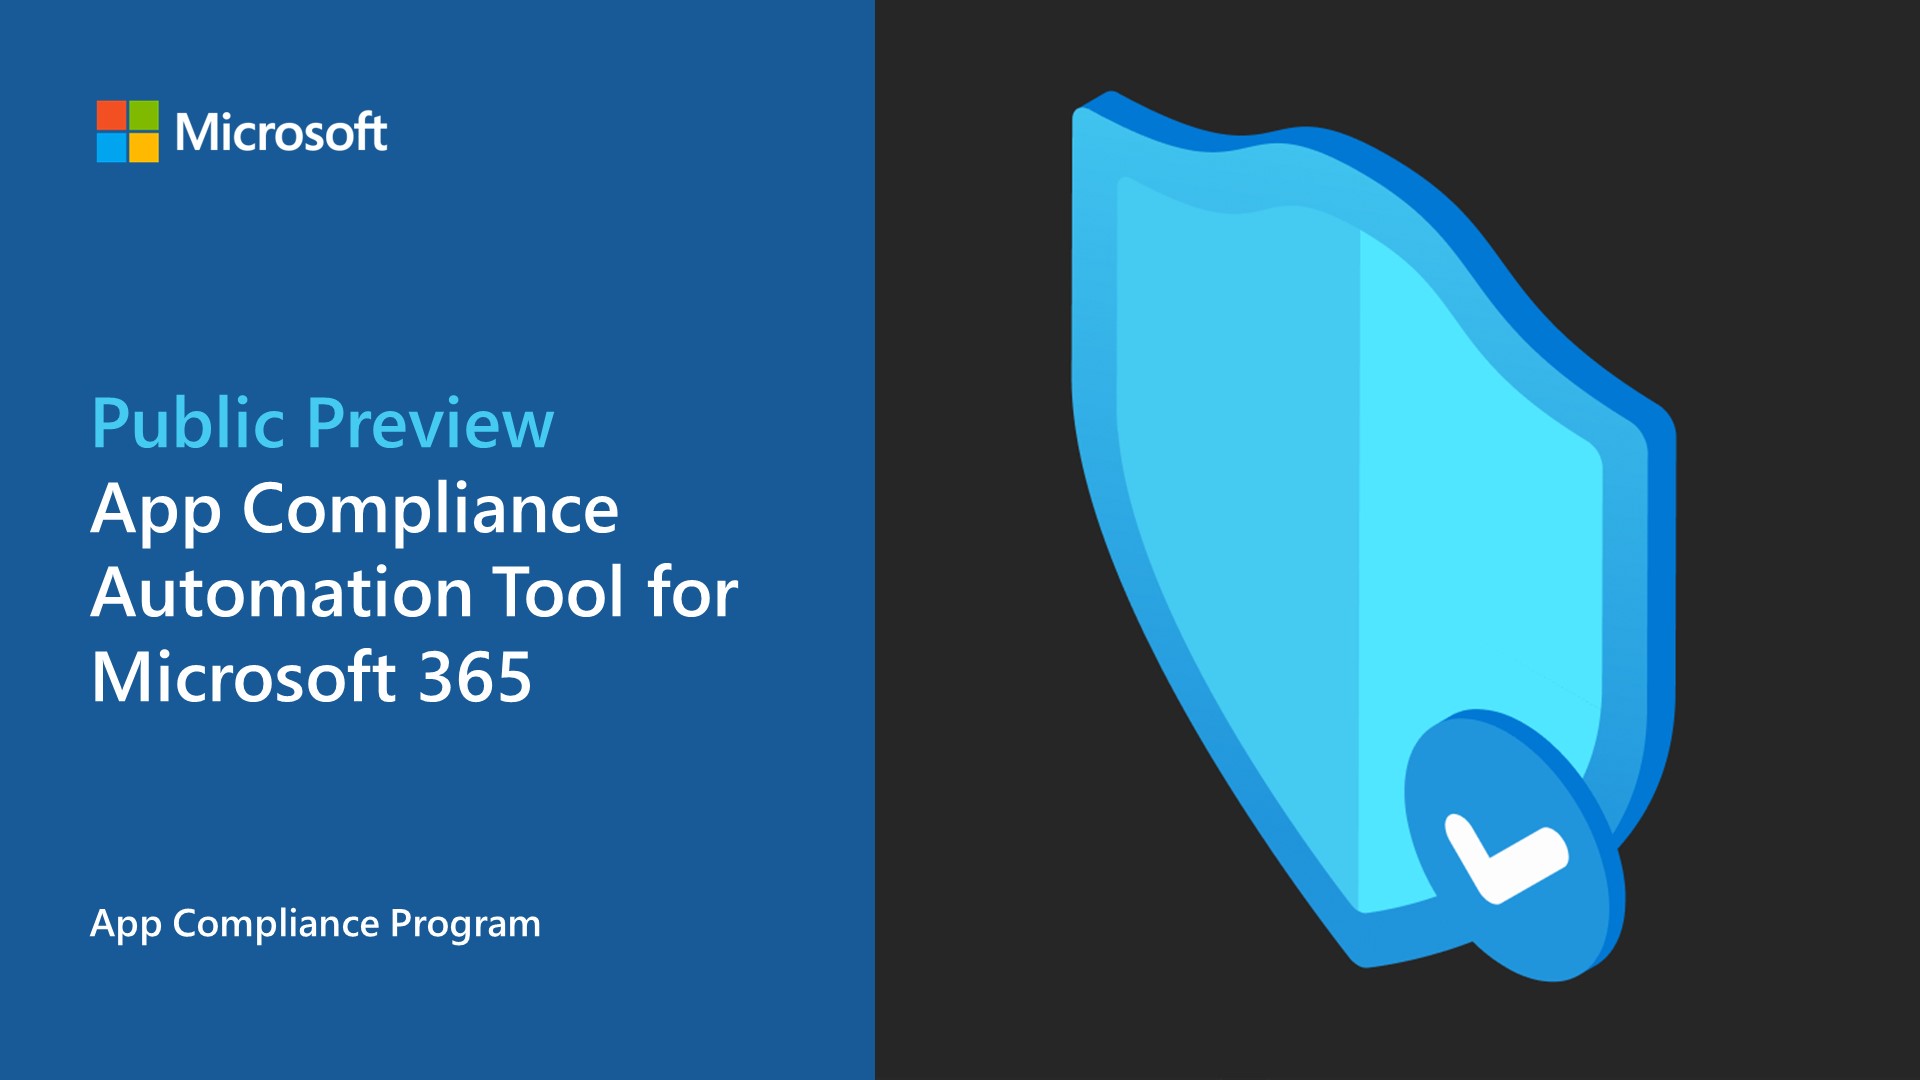 App Compliance Automation Tool for Microsoft 365 launching in public preview